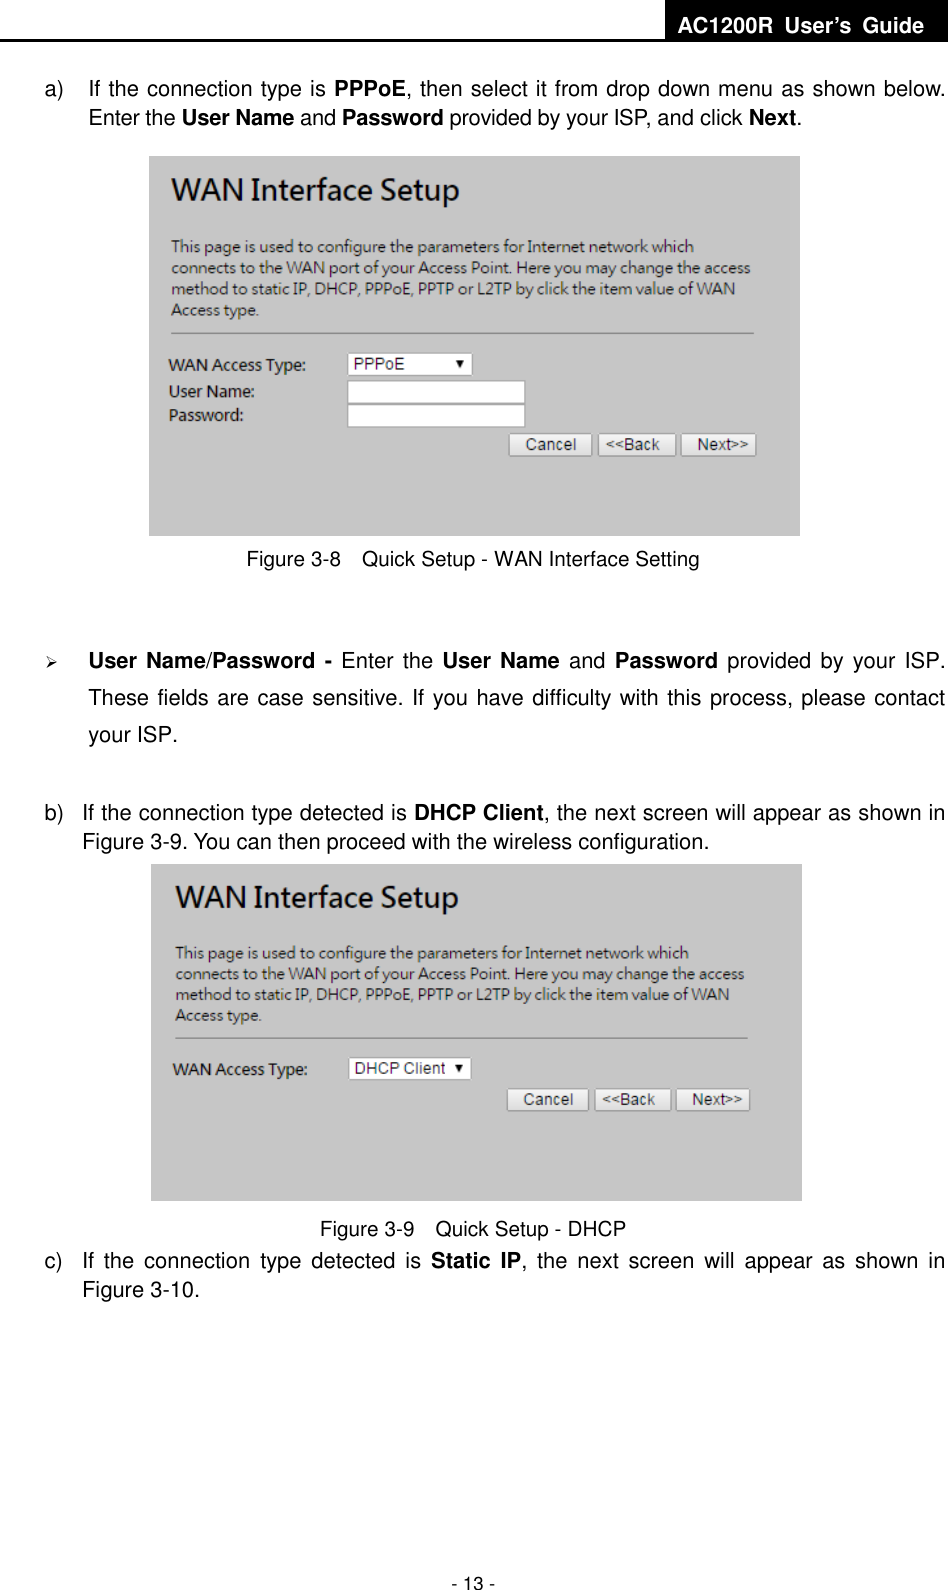  AC1200R  User’s  Guide  - 13 - a)  If the connection type is PPPoE, then select it from drop down menu as shown below. Enter the User Name and Password provided by your ISP, and click Next.  Figure 3-8    Quick Setup - WAN Interface Setting   User Name/Password - Enter the User Name and Password provided by your ISP. These fields are case sensitive. If you have difficulty with this process, please contact your ISP.  b)  If the connection type detected is DHCP Client, the next screen will appear as shown in Figure 3-9. You can then proceed with the wireless configuration.  Figure 3-9    Quick Setup - DHCP c)  If the  connection  type  detected  is  Static  IP,  the  next  screen  will  appear  as  shown  in Figure 3-10. 